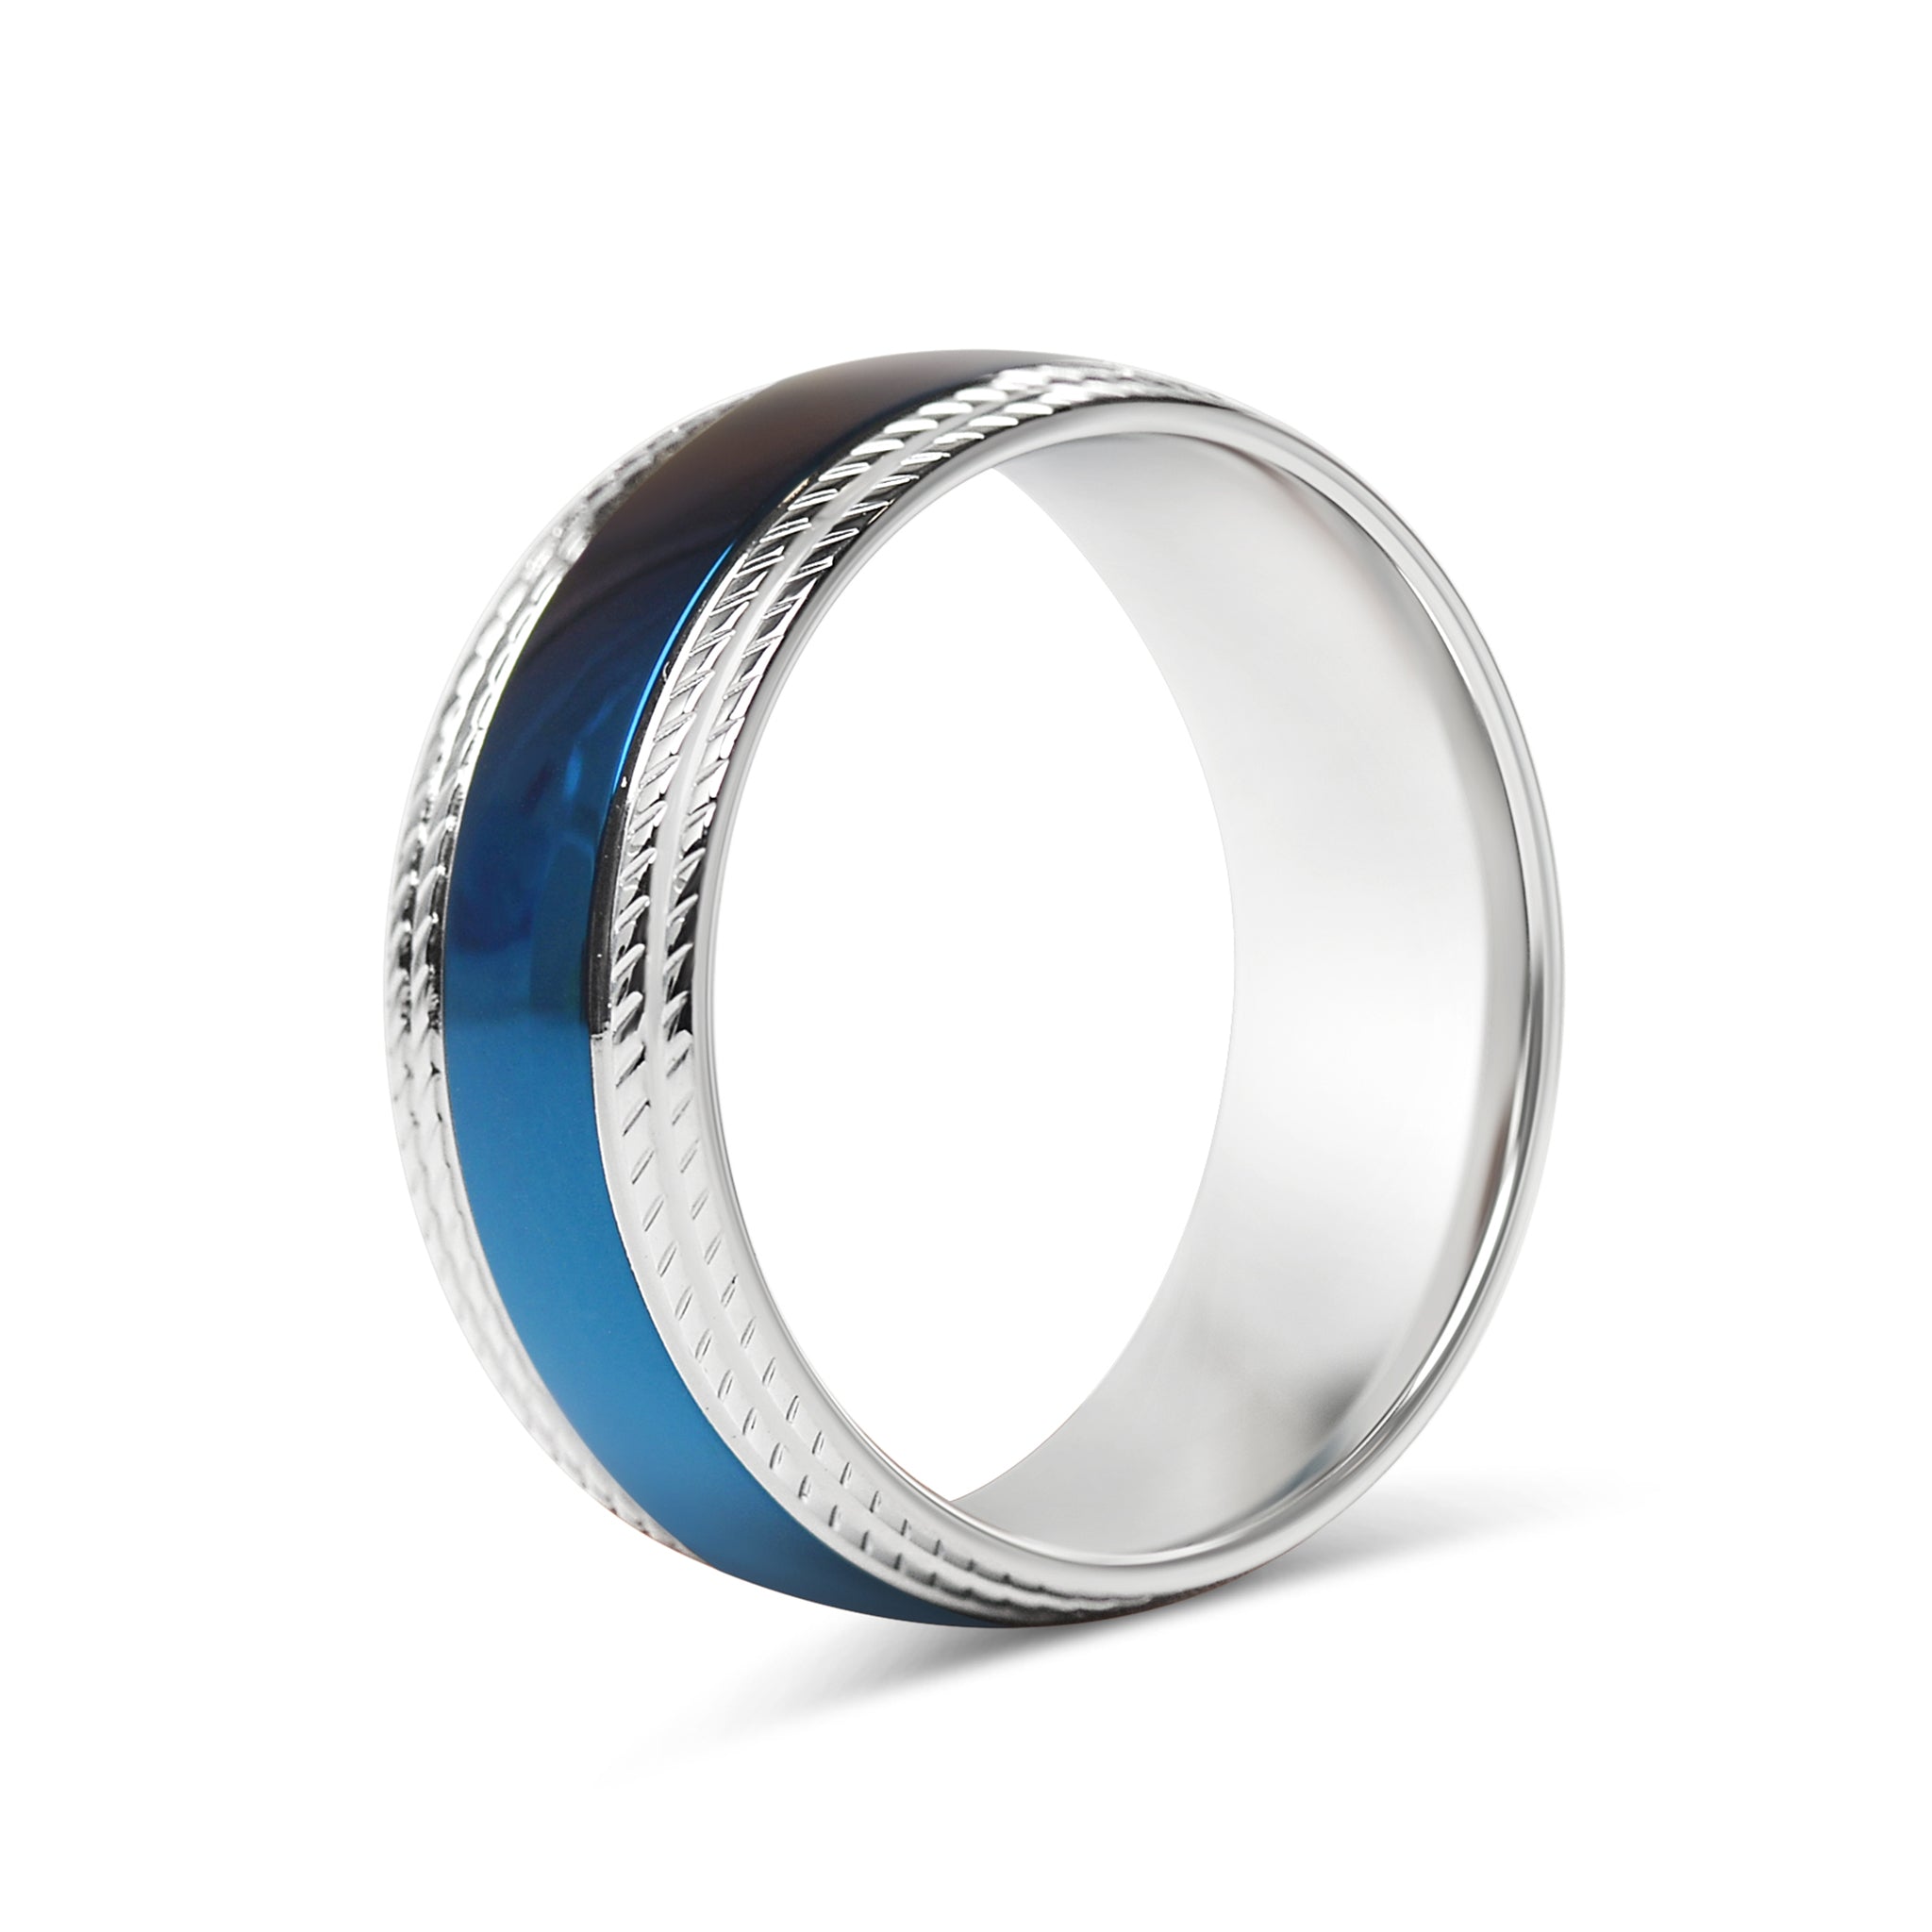 Blue Center With Lined Patterned Edge Stainless Steel Ring / CFR7003